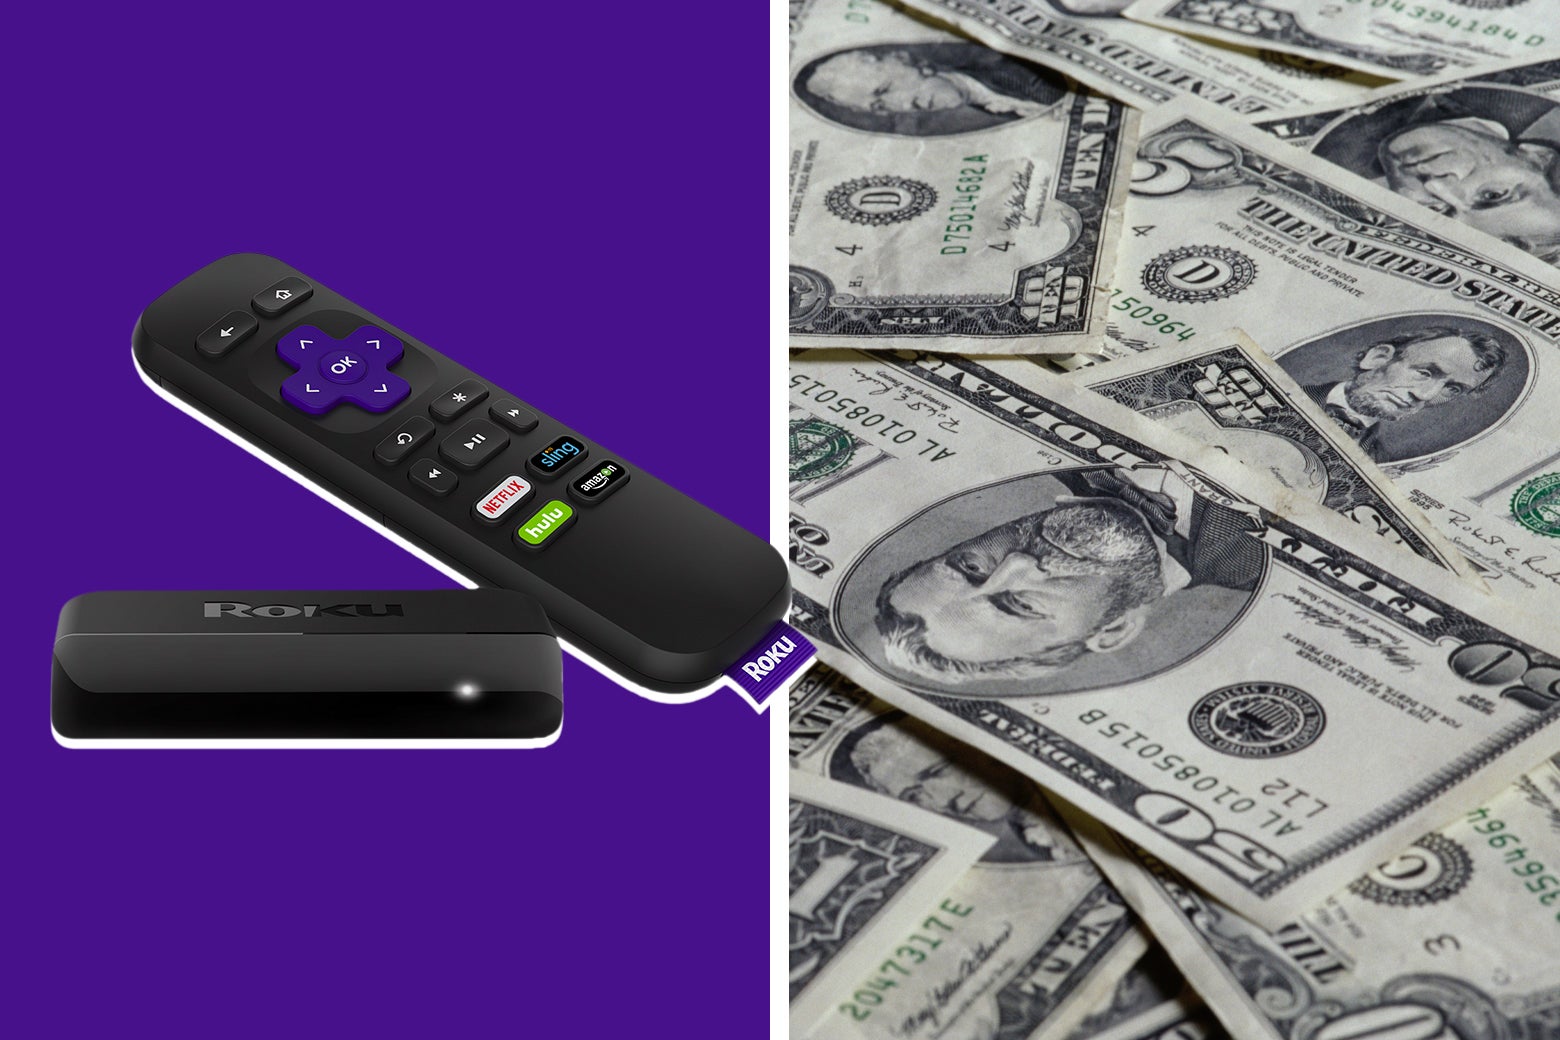 A Roku device on one side, a pile of money on the other.